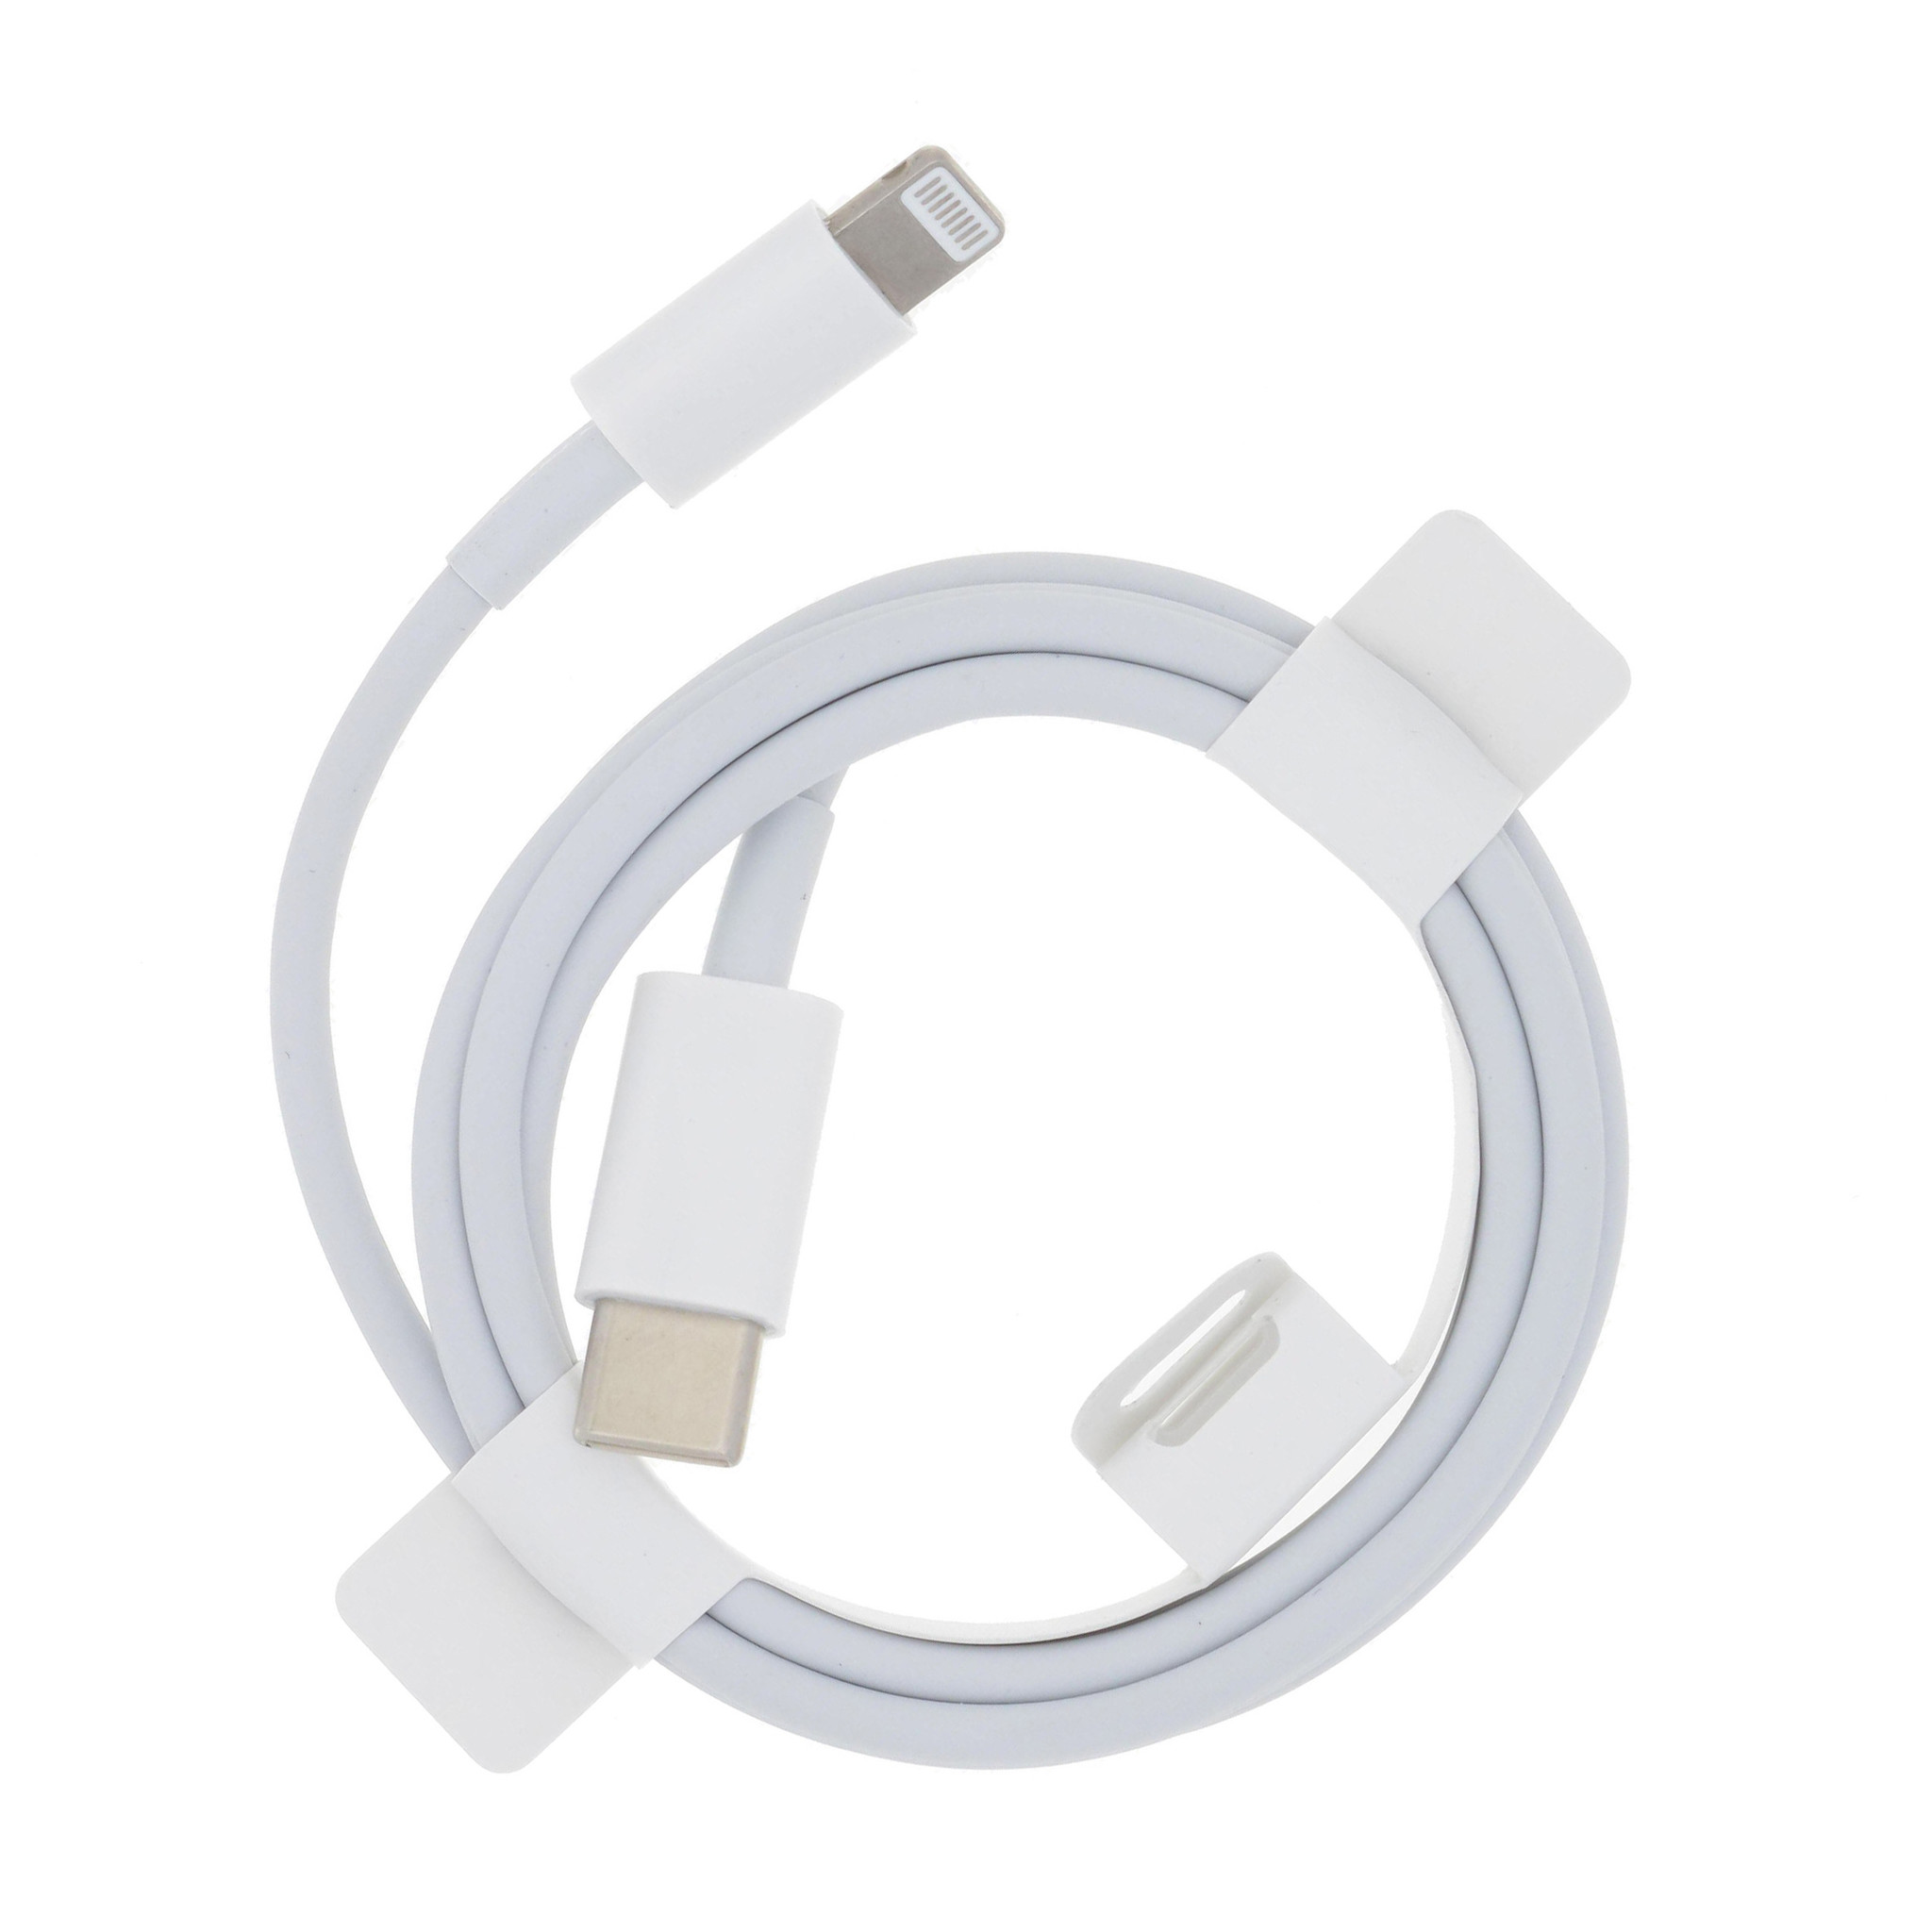 apple USB-C to Lightning Cable (1m) Unboxing 